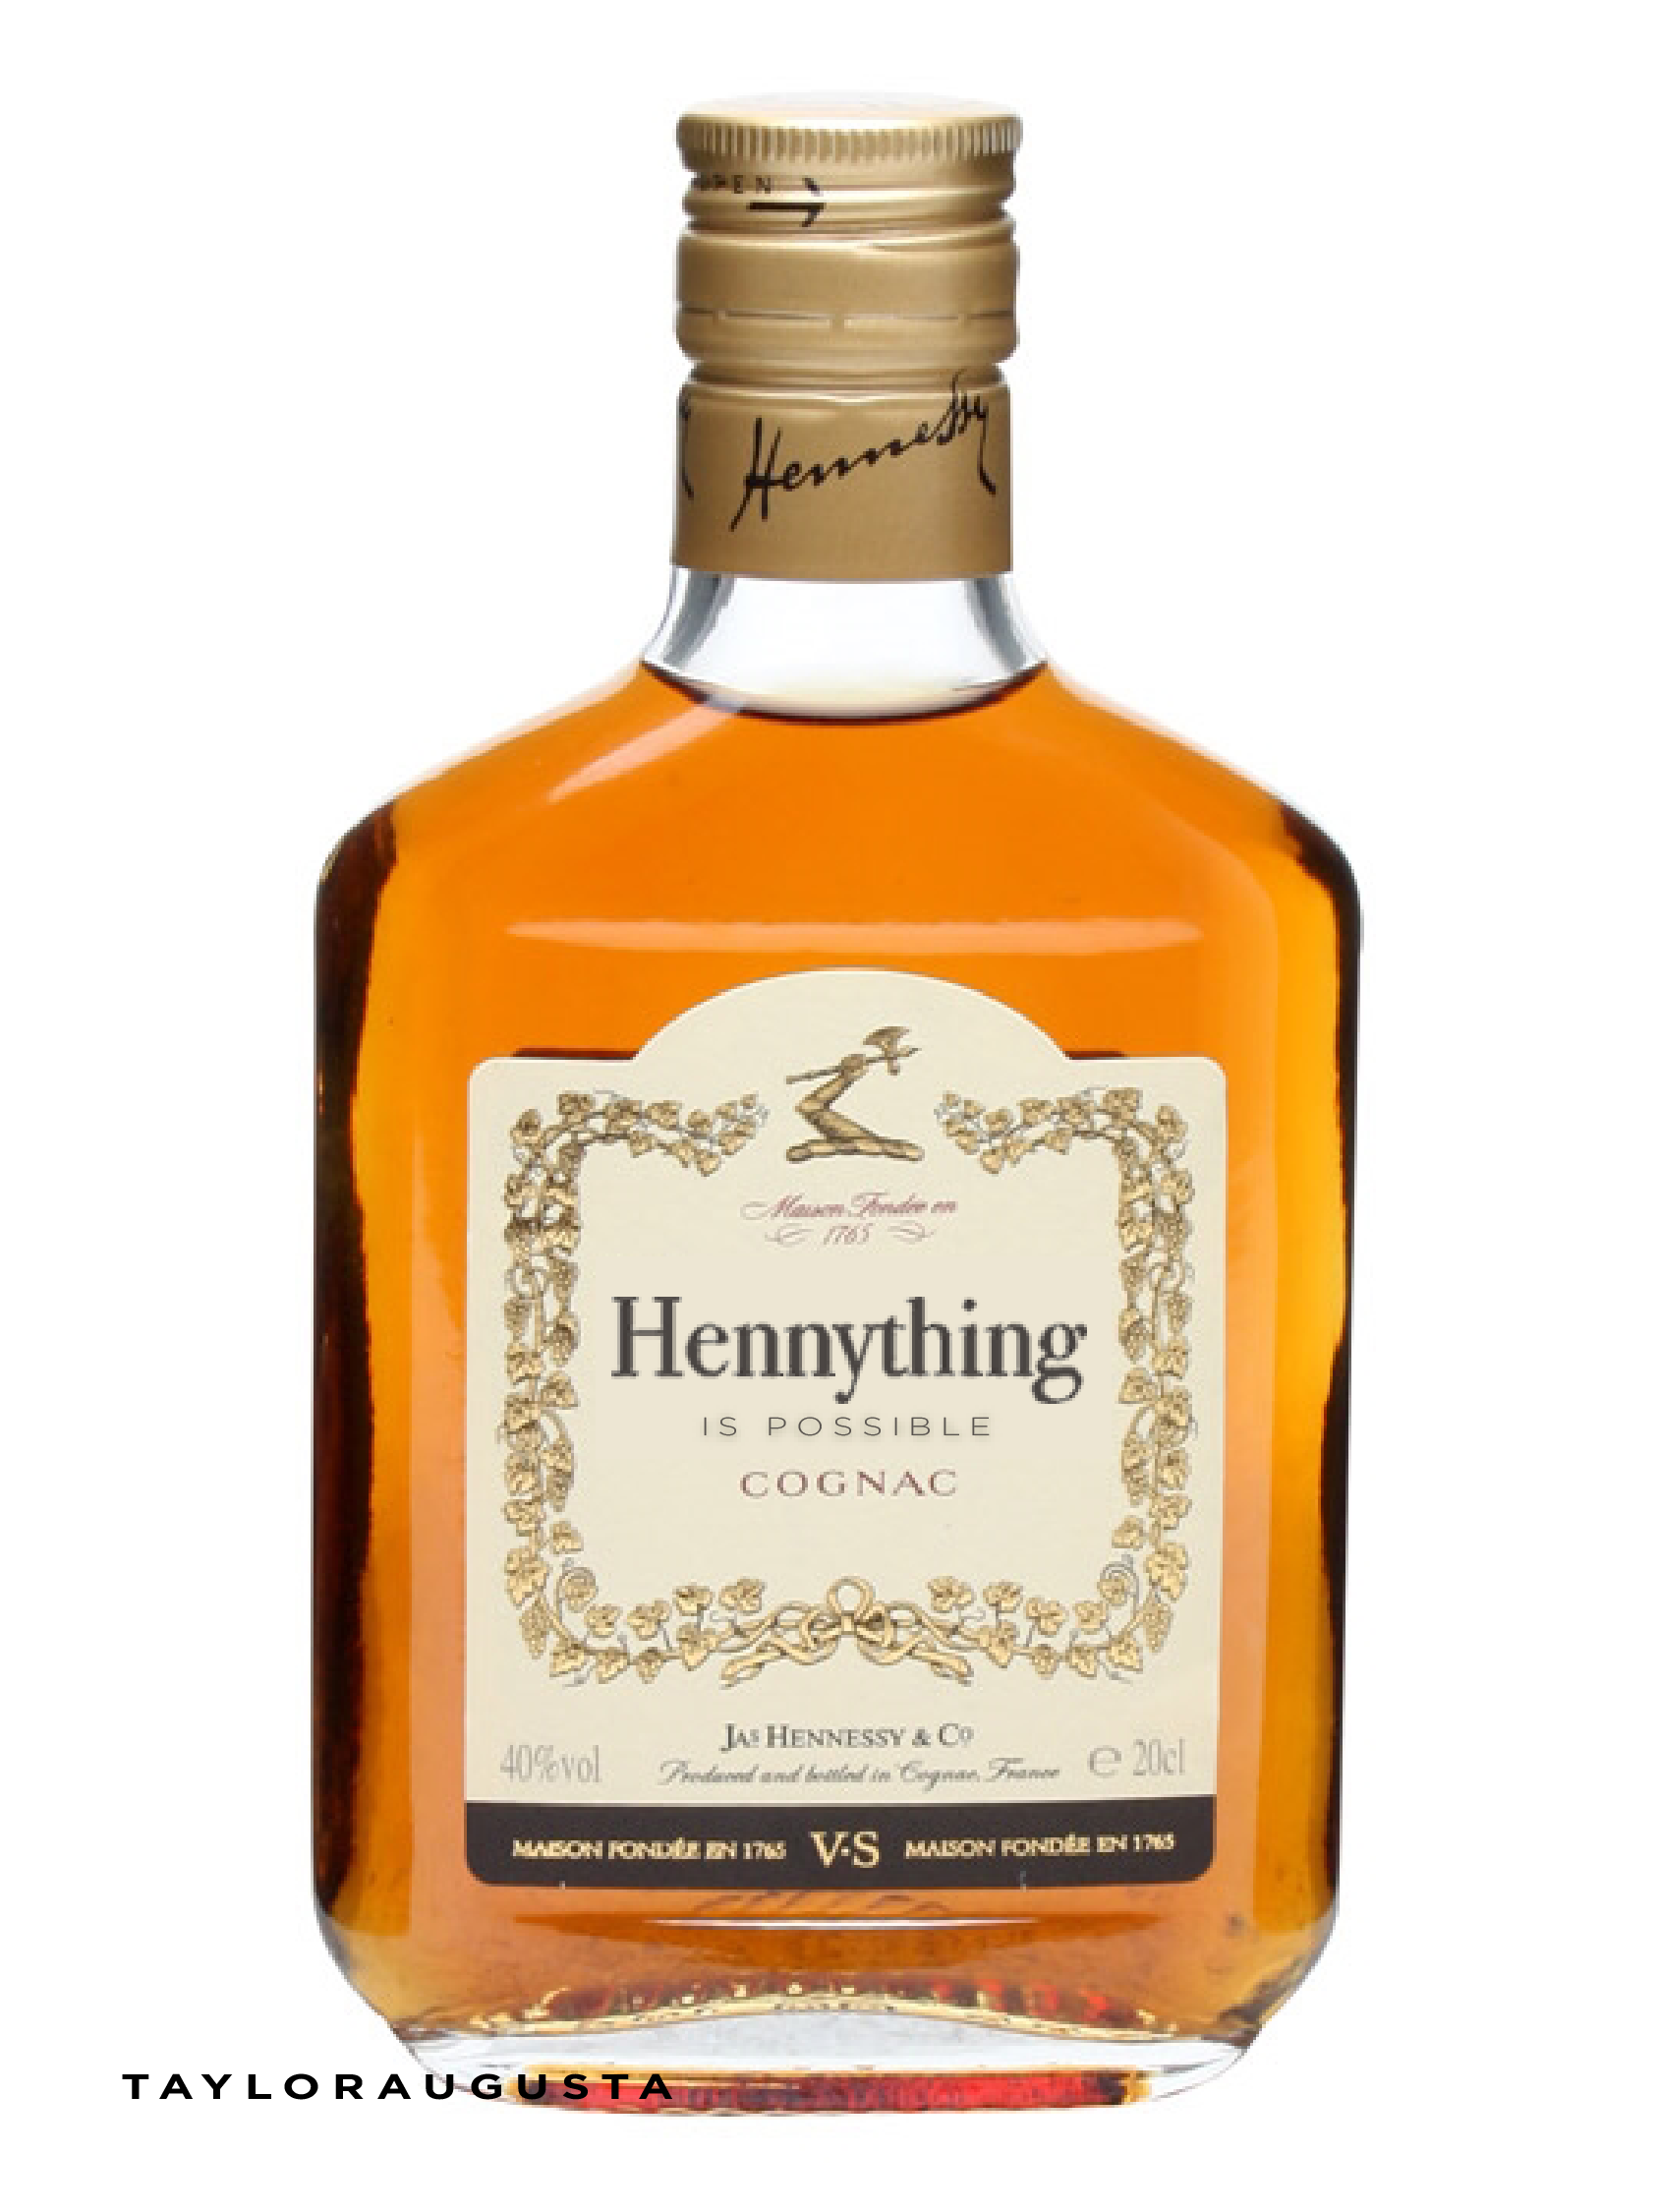 Hennything is Possible Hennessy